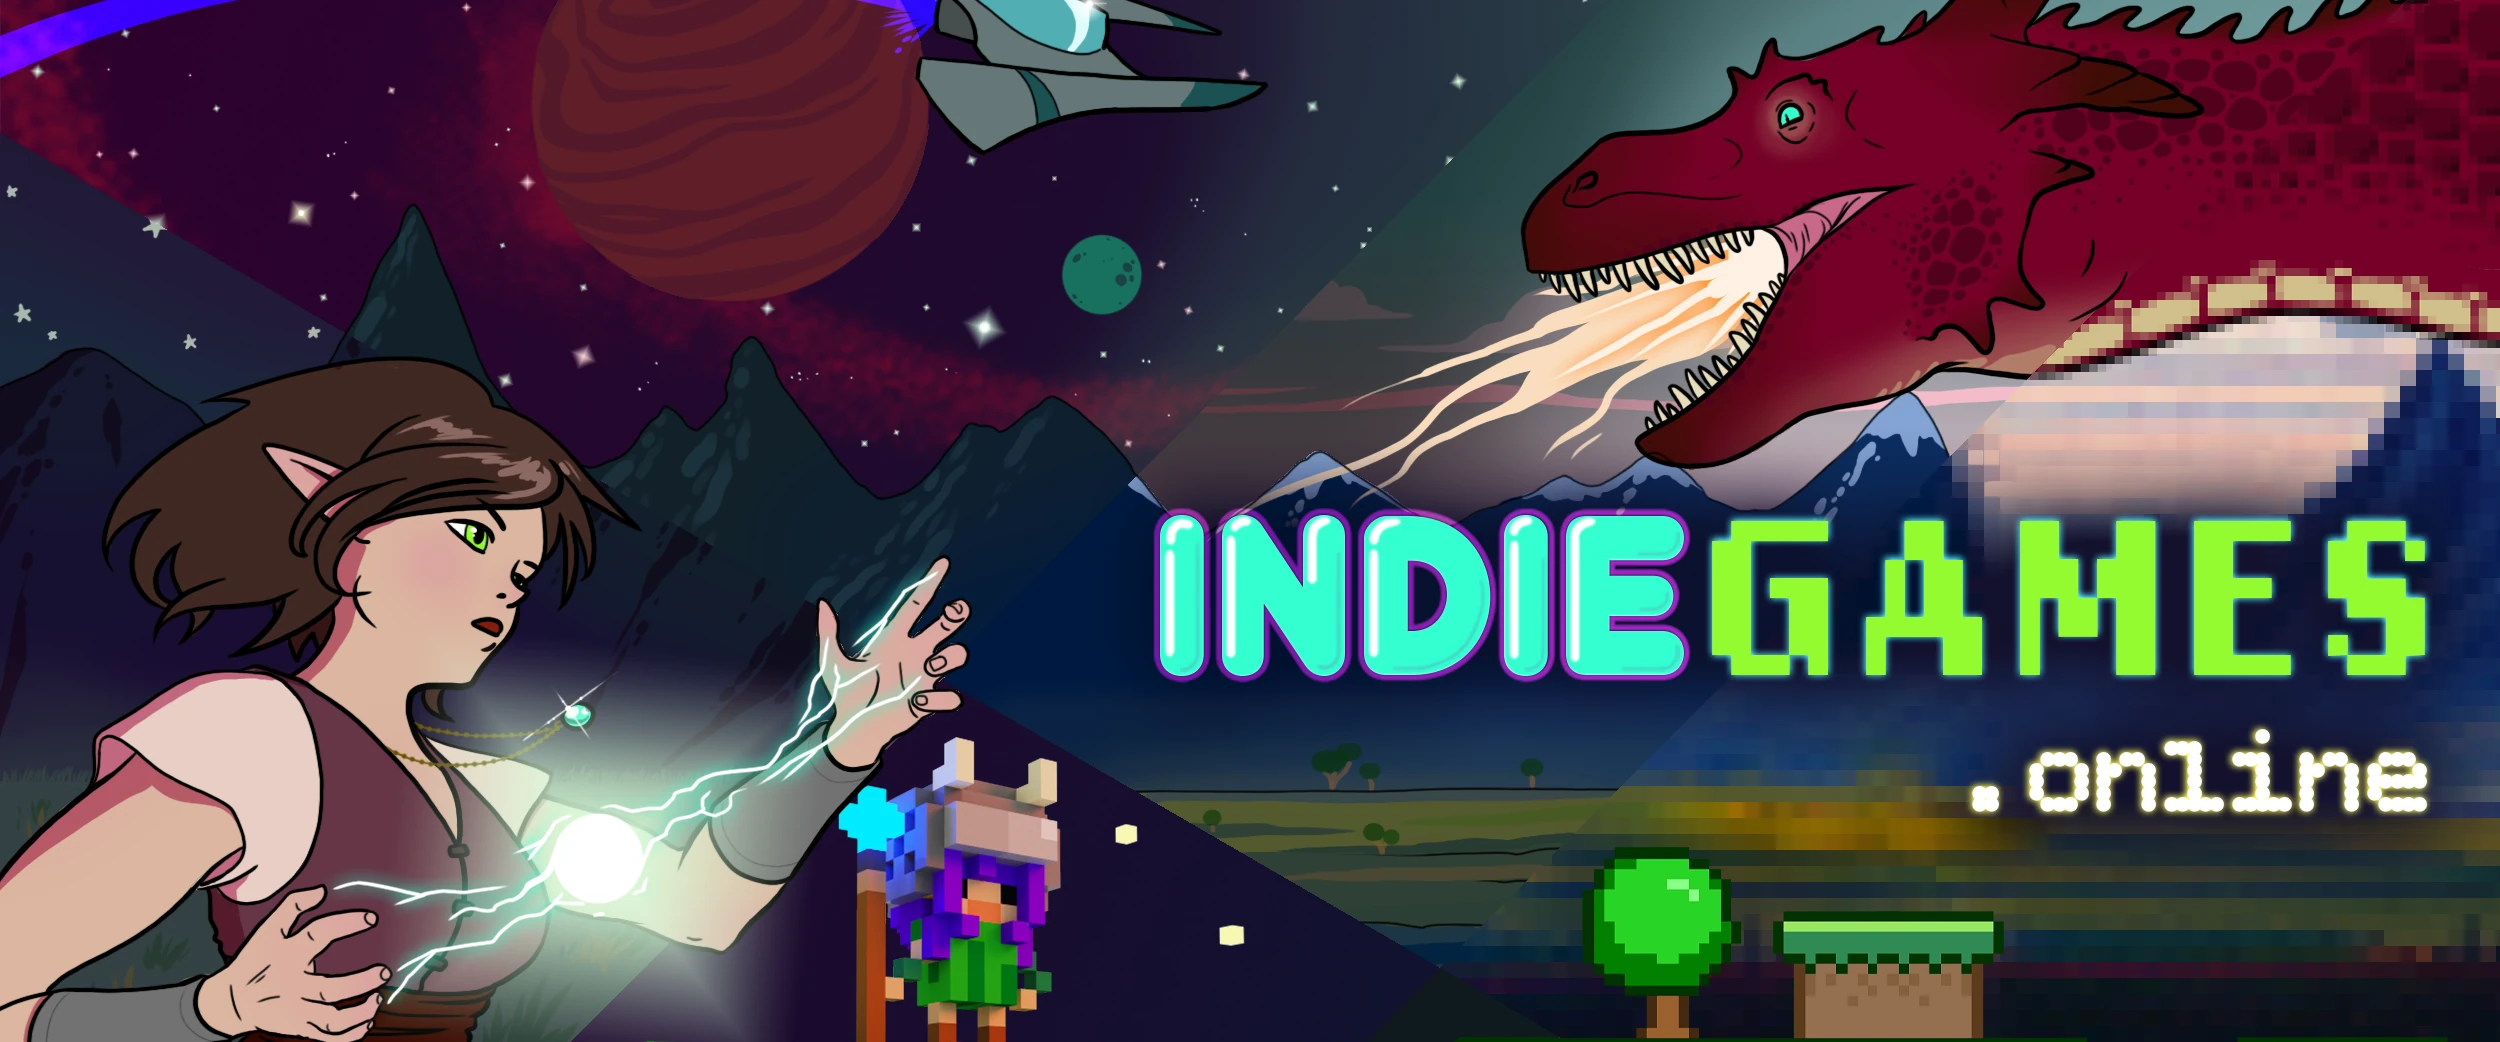 collage image in various styles with indiegames.online logo. an elf character in the bottom left, casts a spell and faces off against a fire breating dragon in the opposite corner, along the top is a spaceship flying through space, and along the bottom stands a voxel character with a staff, standing on a pixelated platform